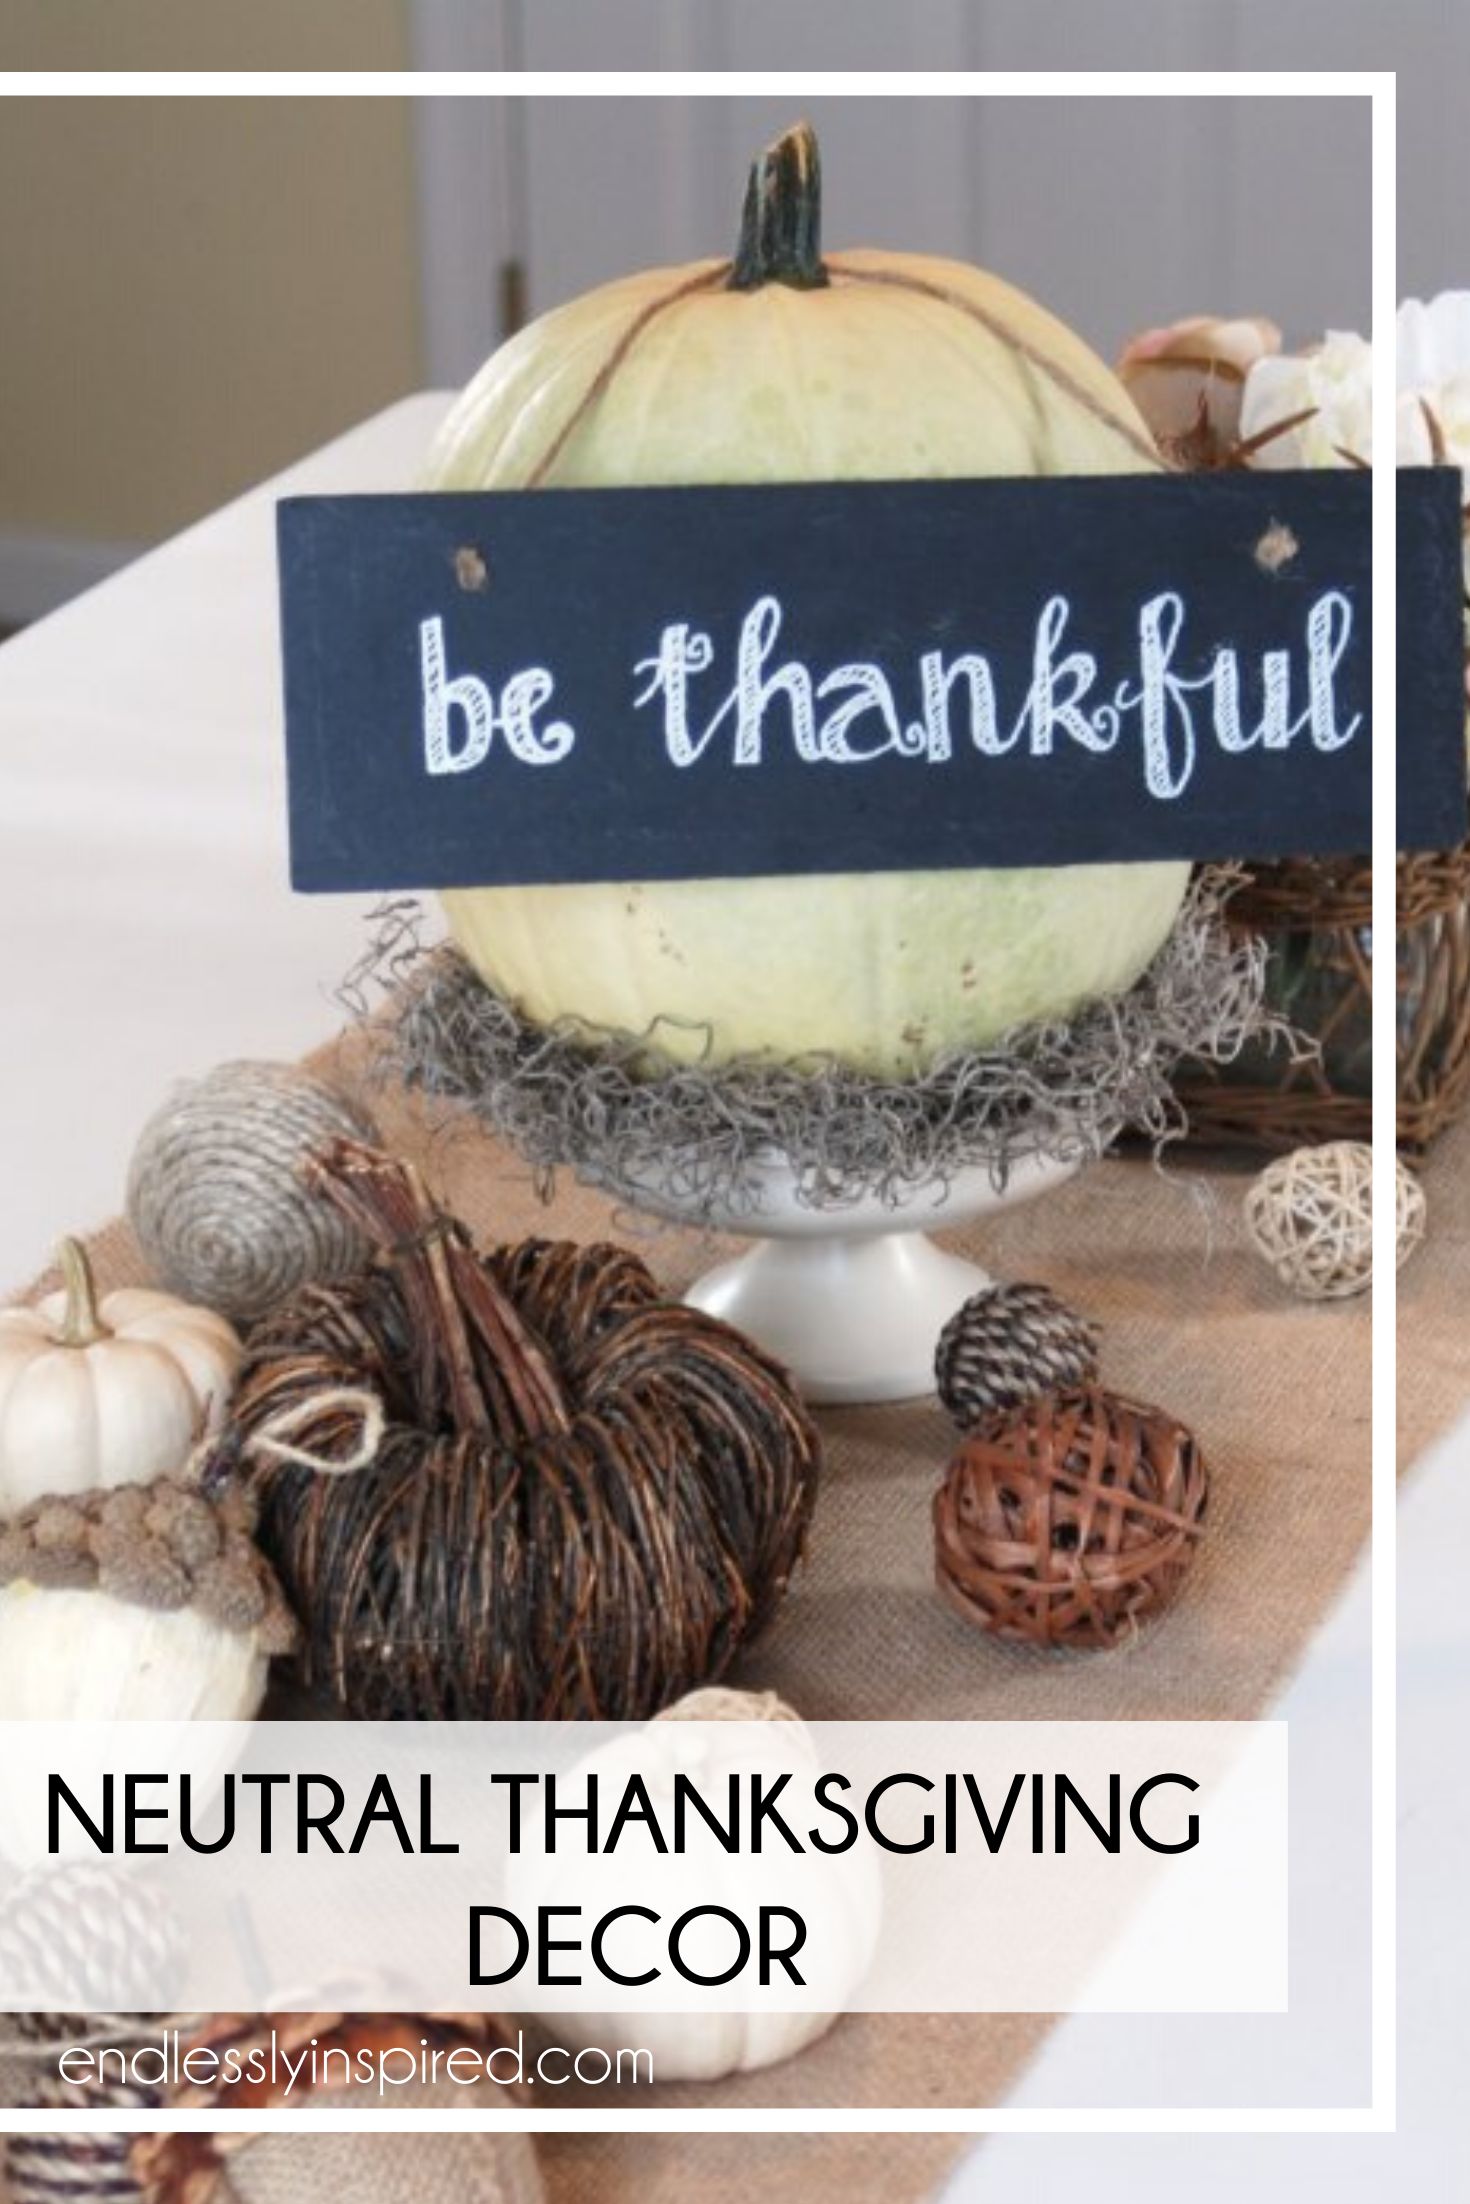 A table with a burlap runner, white pumpkins and other neutral fall decor